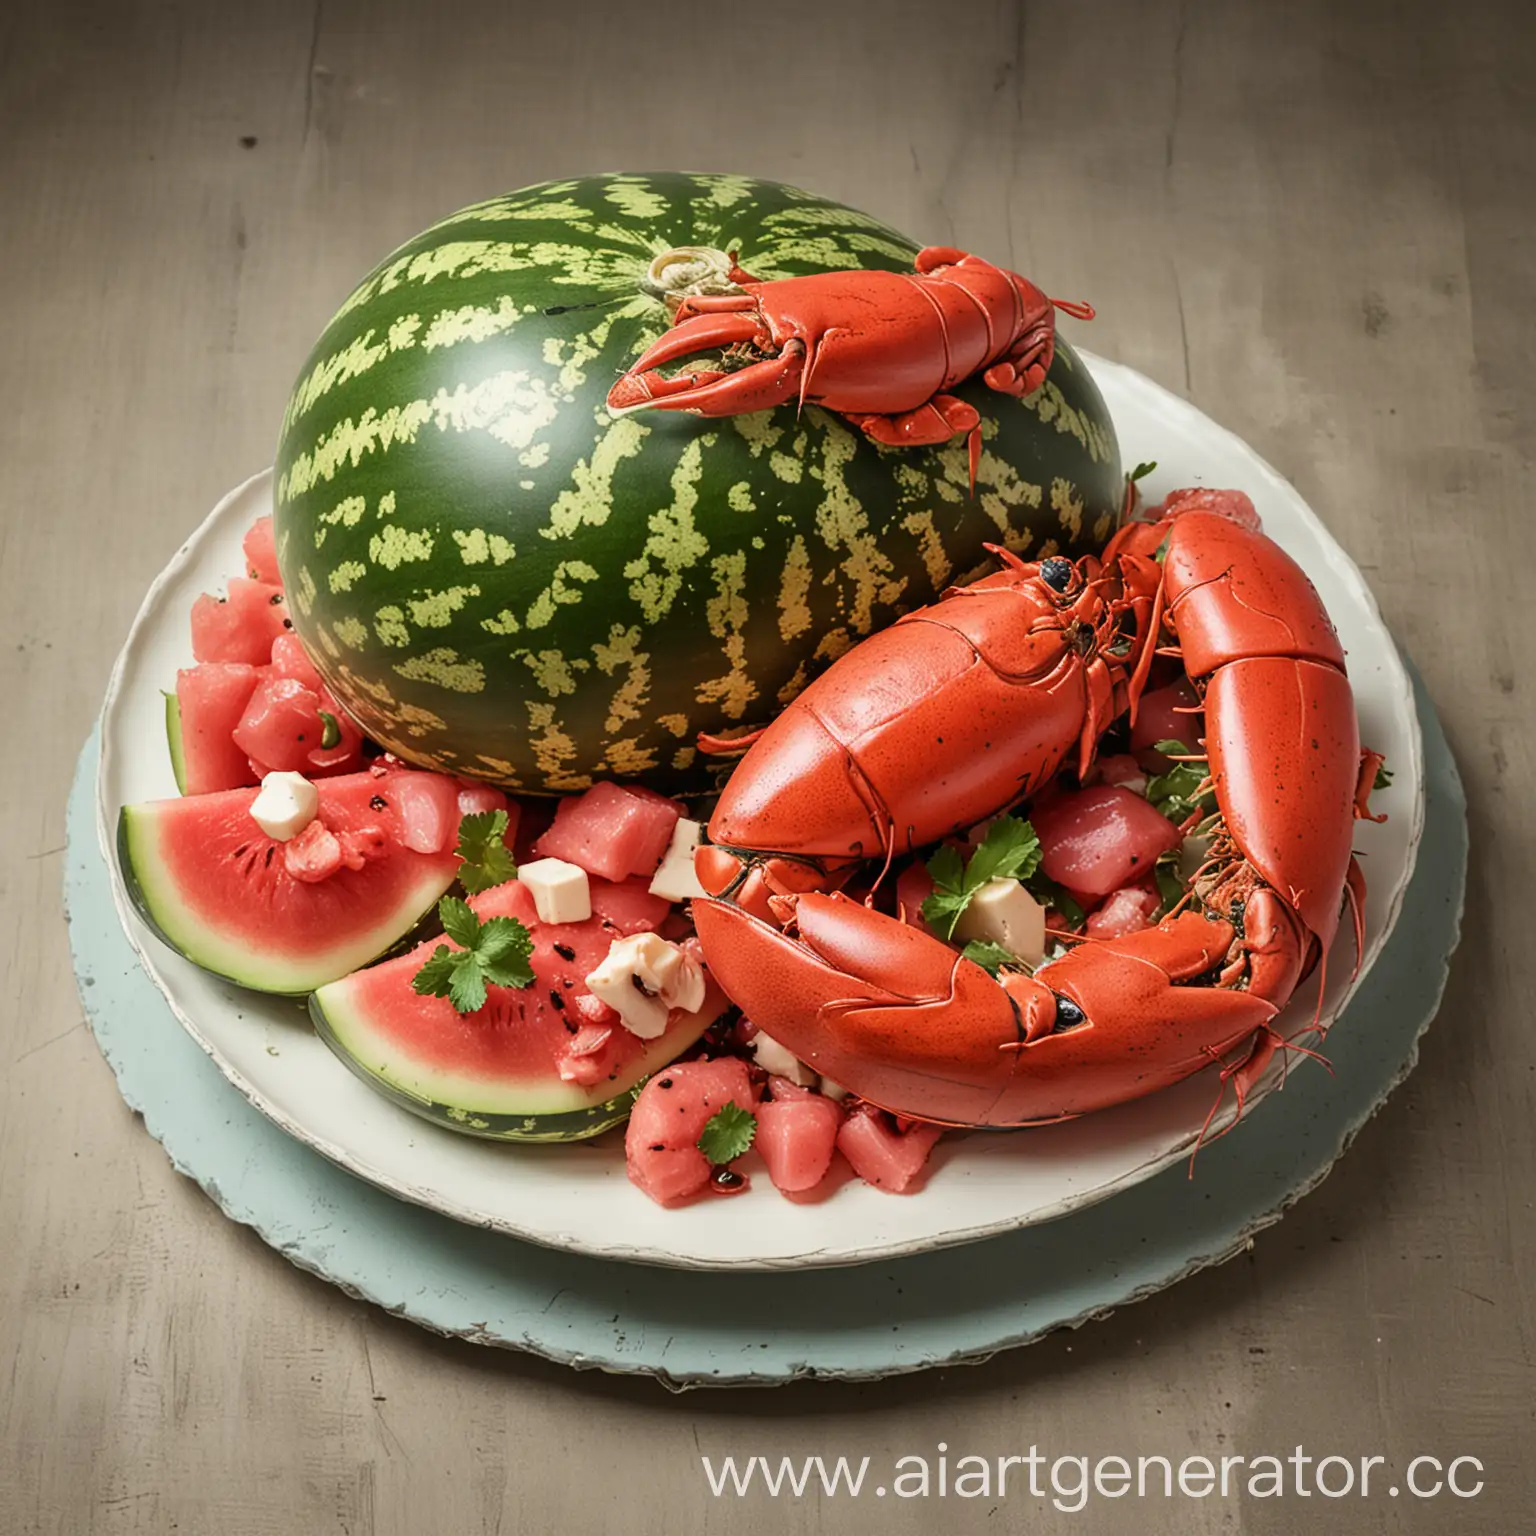 Fresh-Watermelon-and-Lobster-Platter-Exquisite-Seafood-Delight